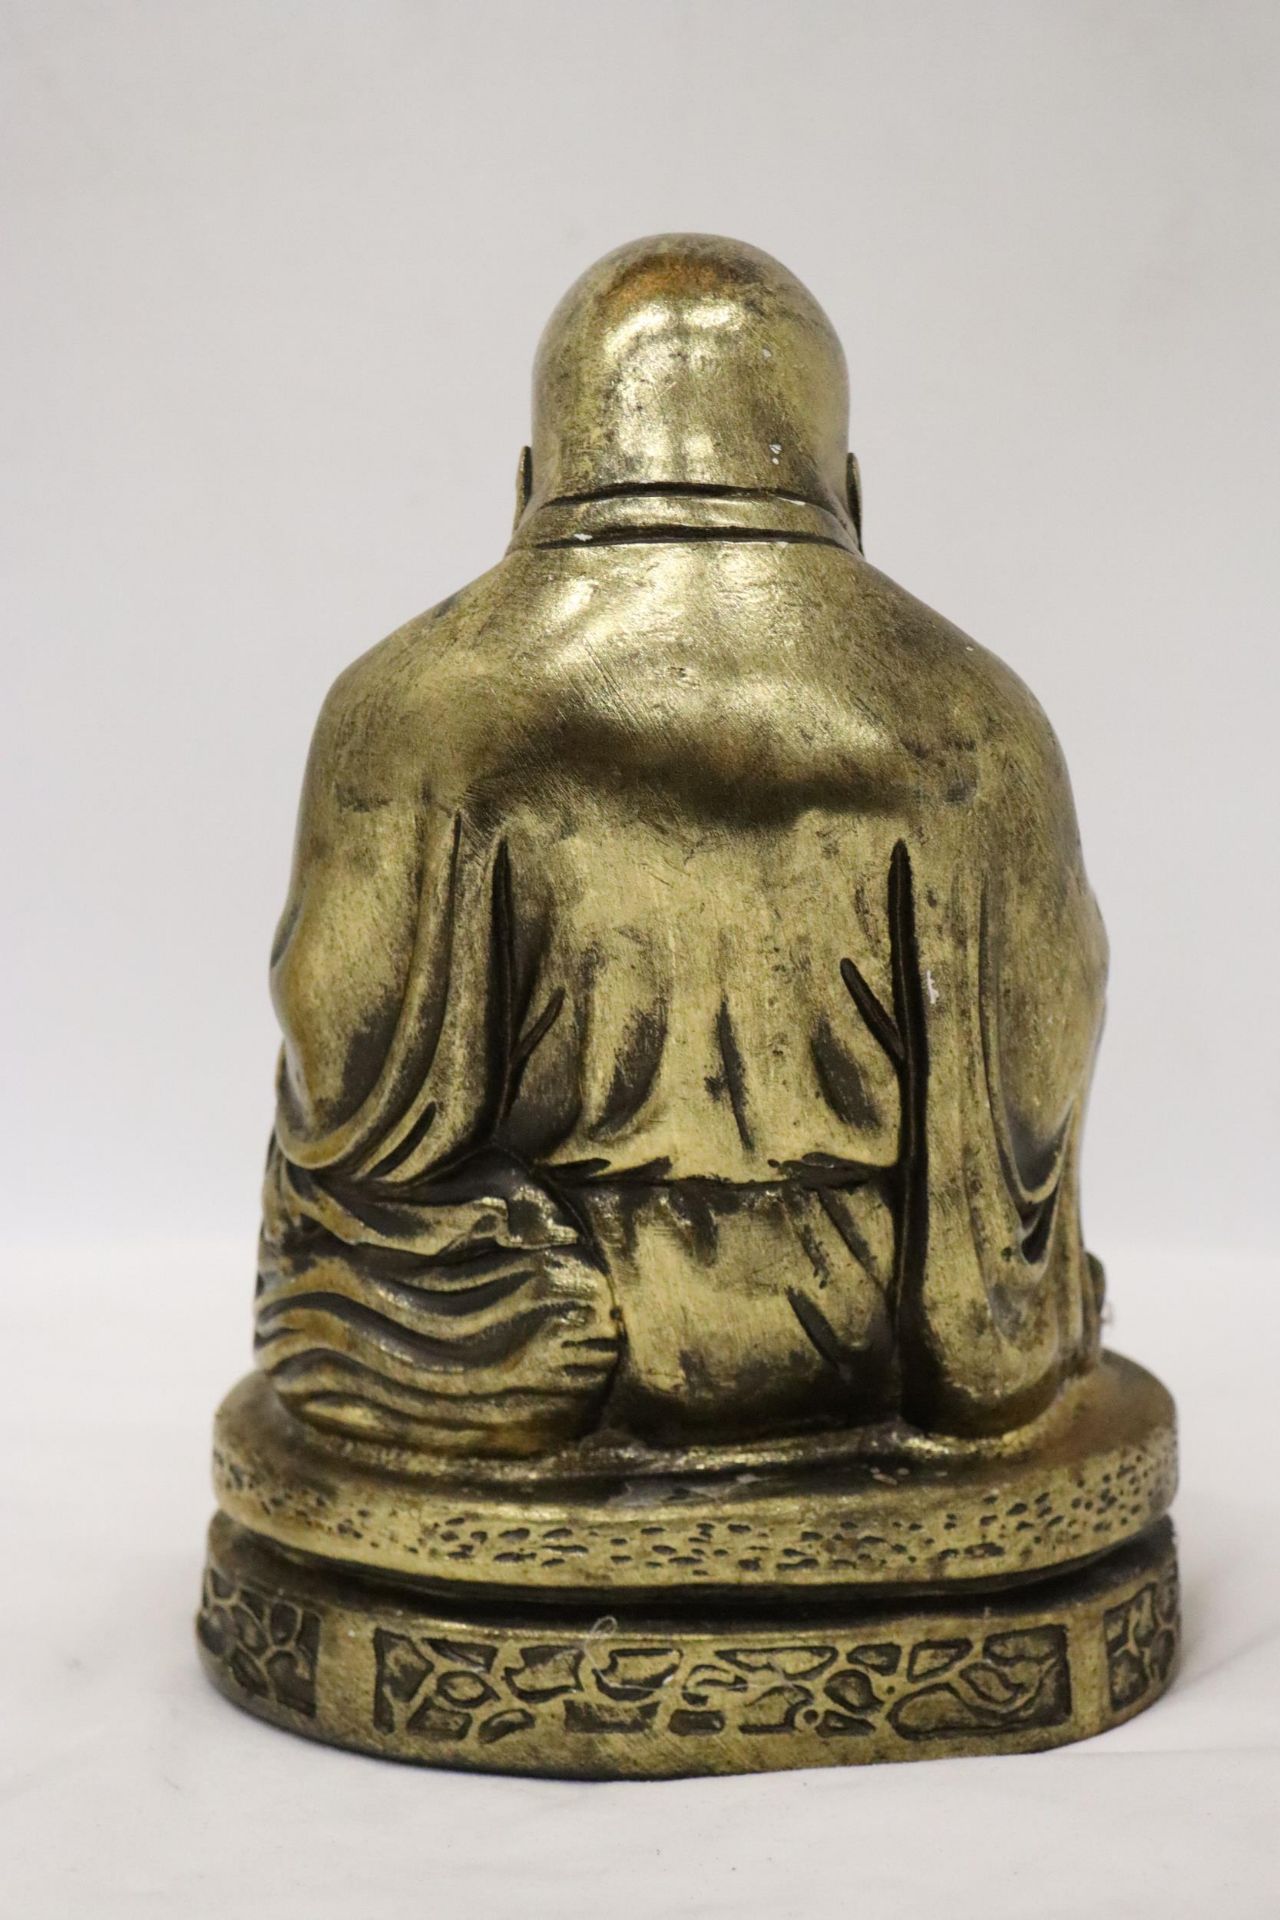 A LARGE RESIN LAUGHING BHUDDA TOGETHER WITH A SMALL BRASS LAUGHING BHUDDA - Image 7 of 7